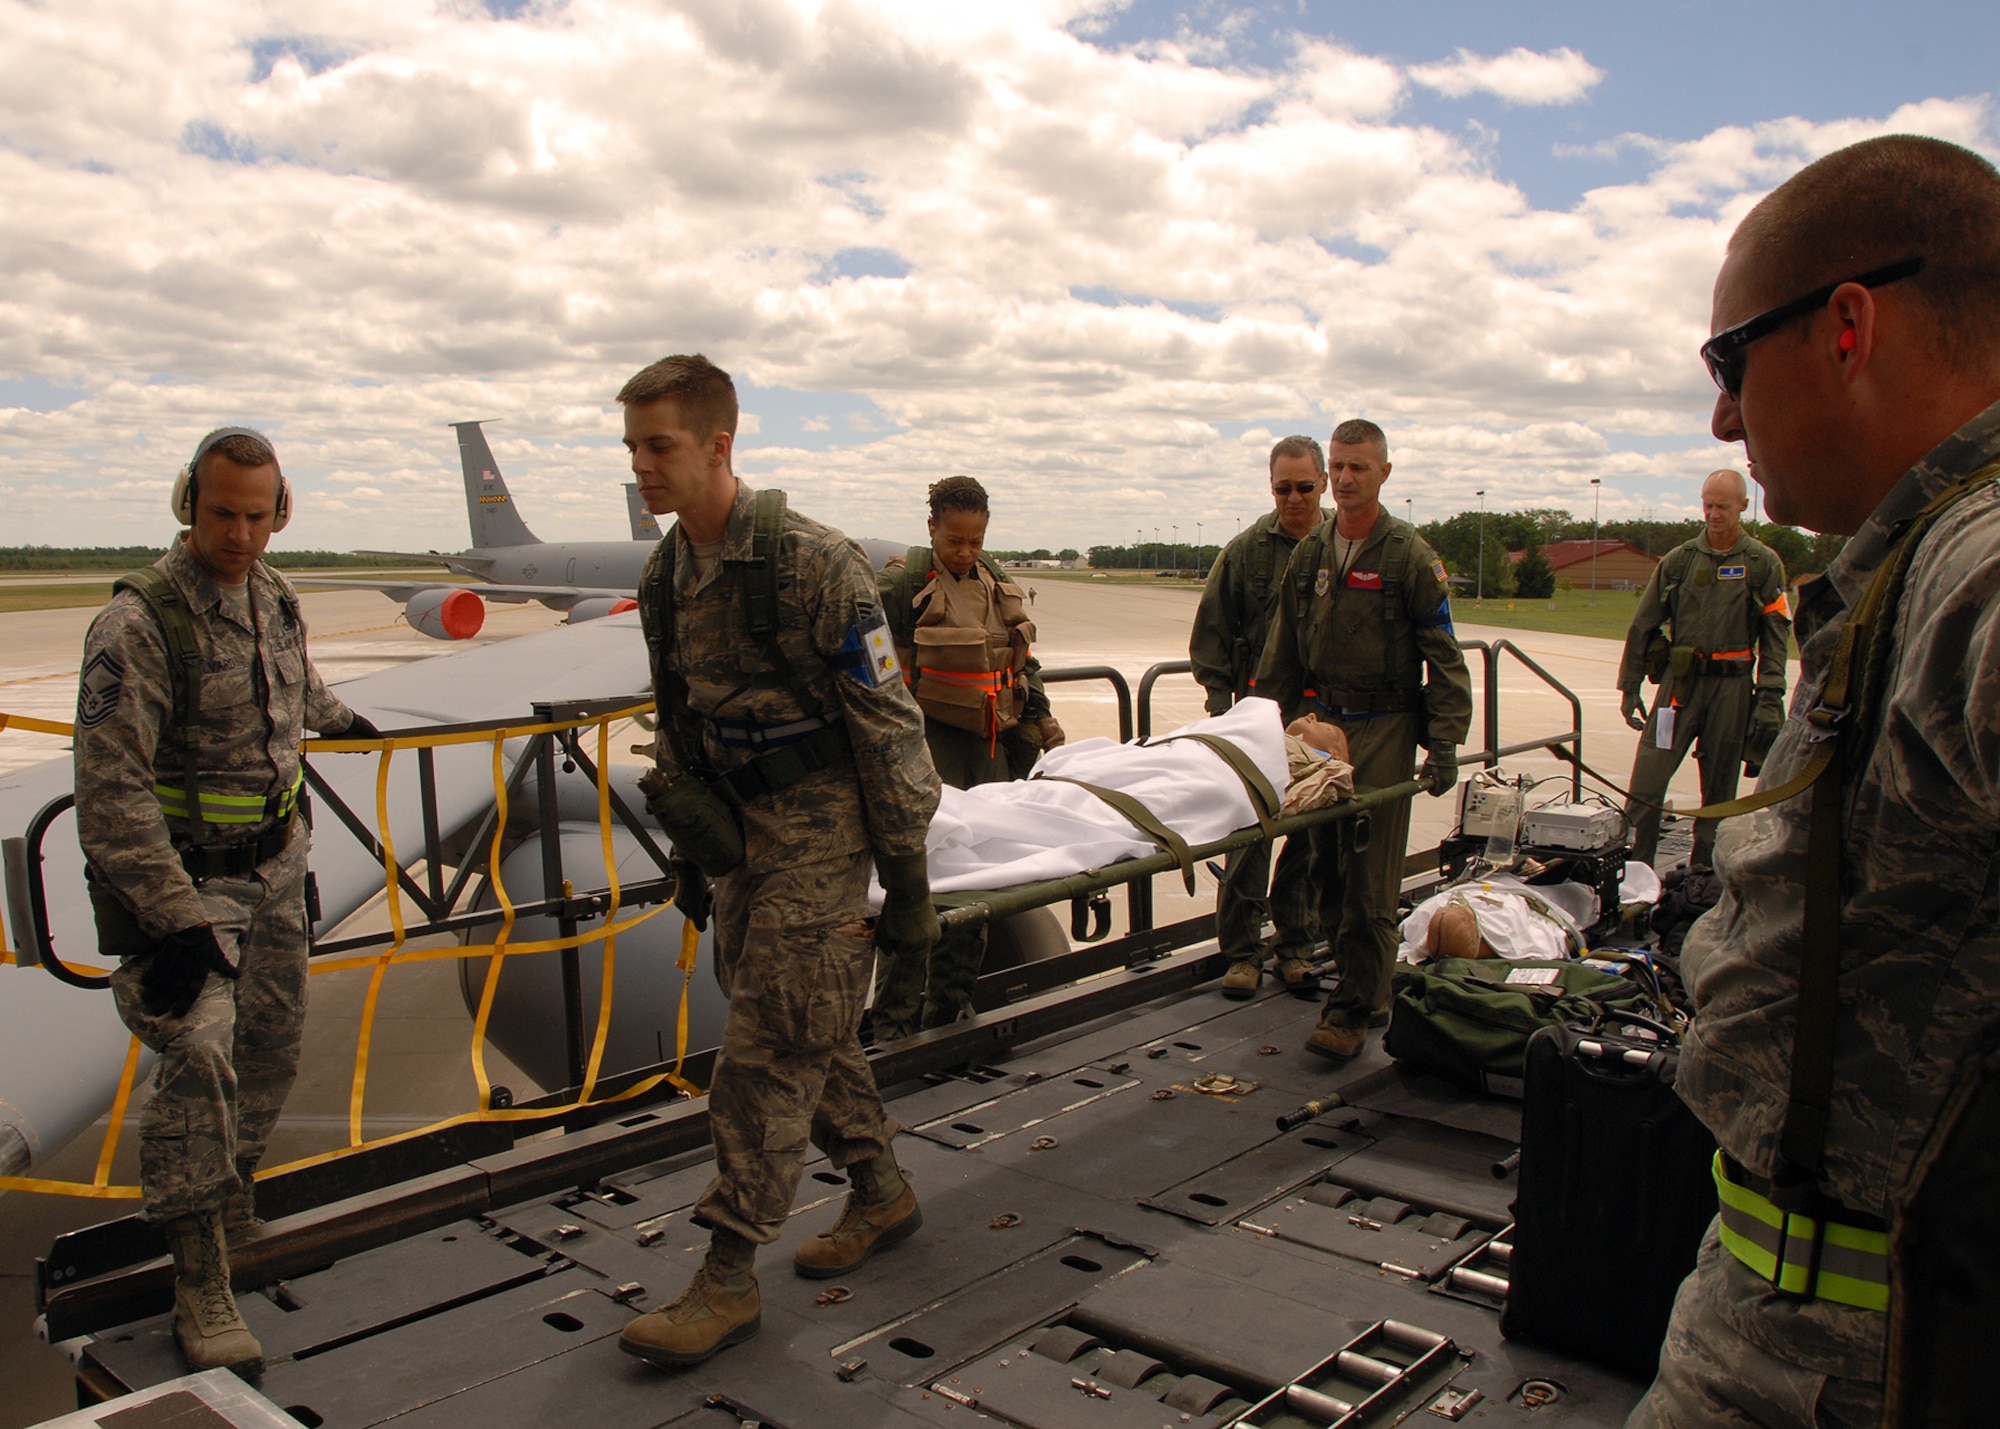 Members from the 137th, 459th and 507th Air Refueling Wings work to load patients and equipment for transport in participation of Exercise Crisis Reach 12-04A June 12, 2012 at the 124th Air Expeditionary Wing in Alpena, Mich.  The 137th, 459th and 507th Air Refueling Wings joined forces for an Operational Readiness Inspection.  (USAF Photo by Tech. Sgt. Roberta A. Thompson)